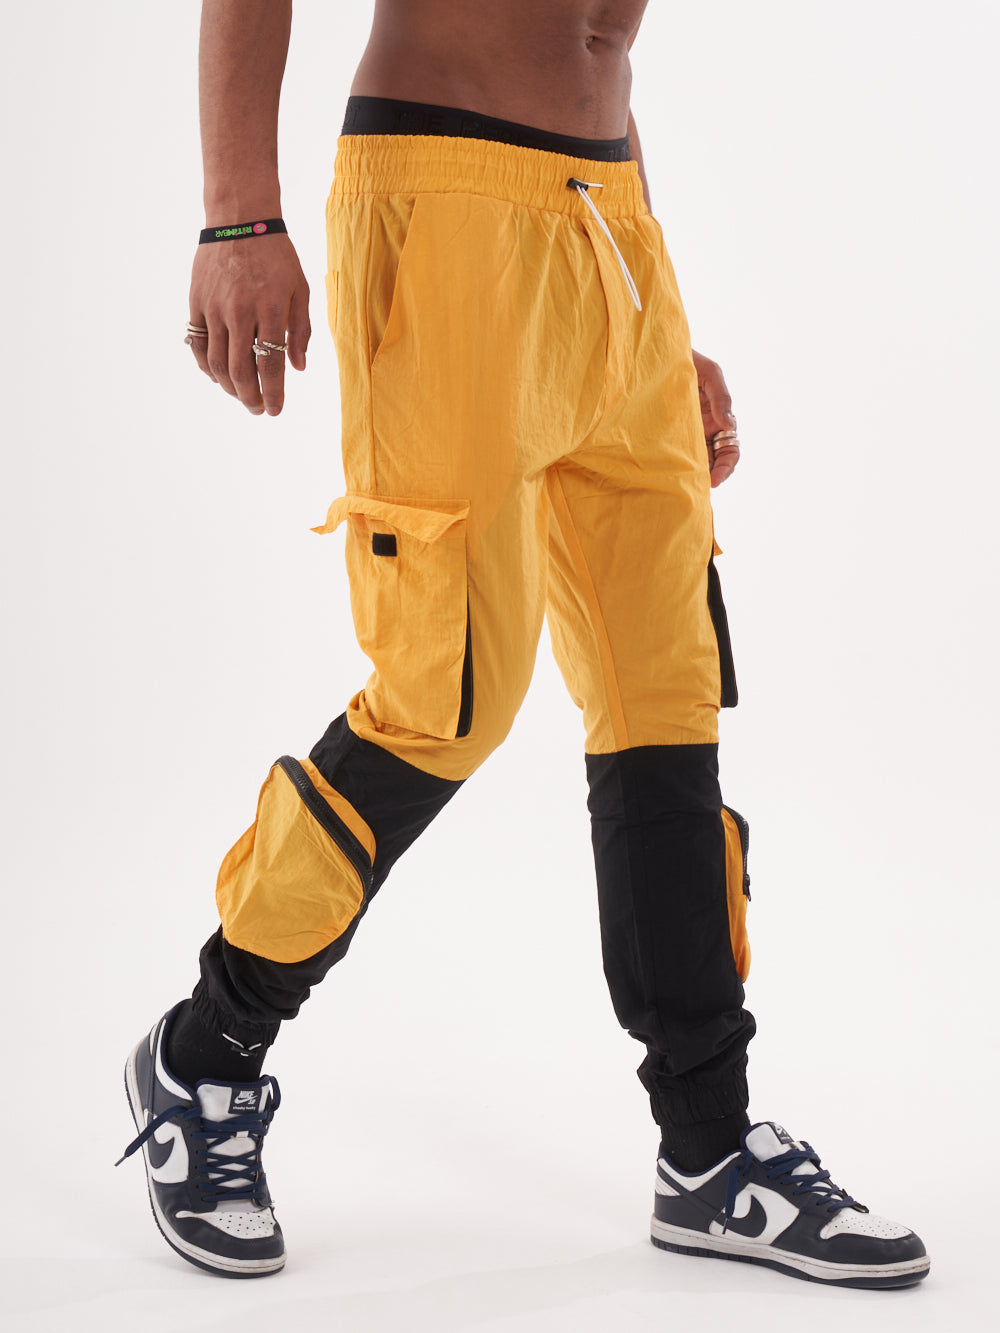 A man wearing RENEGADE | YELLOW cargo pants and black sneakers.